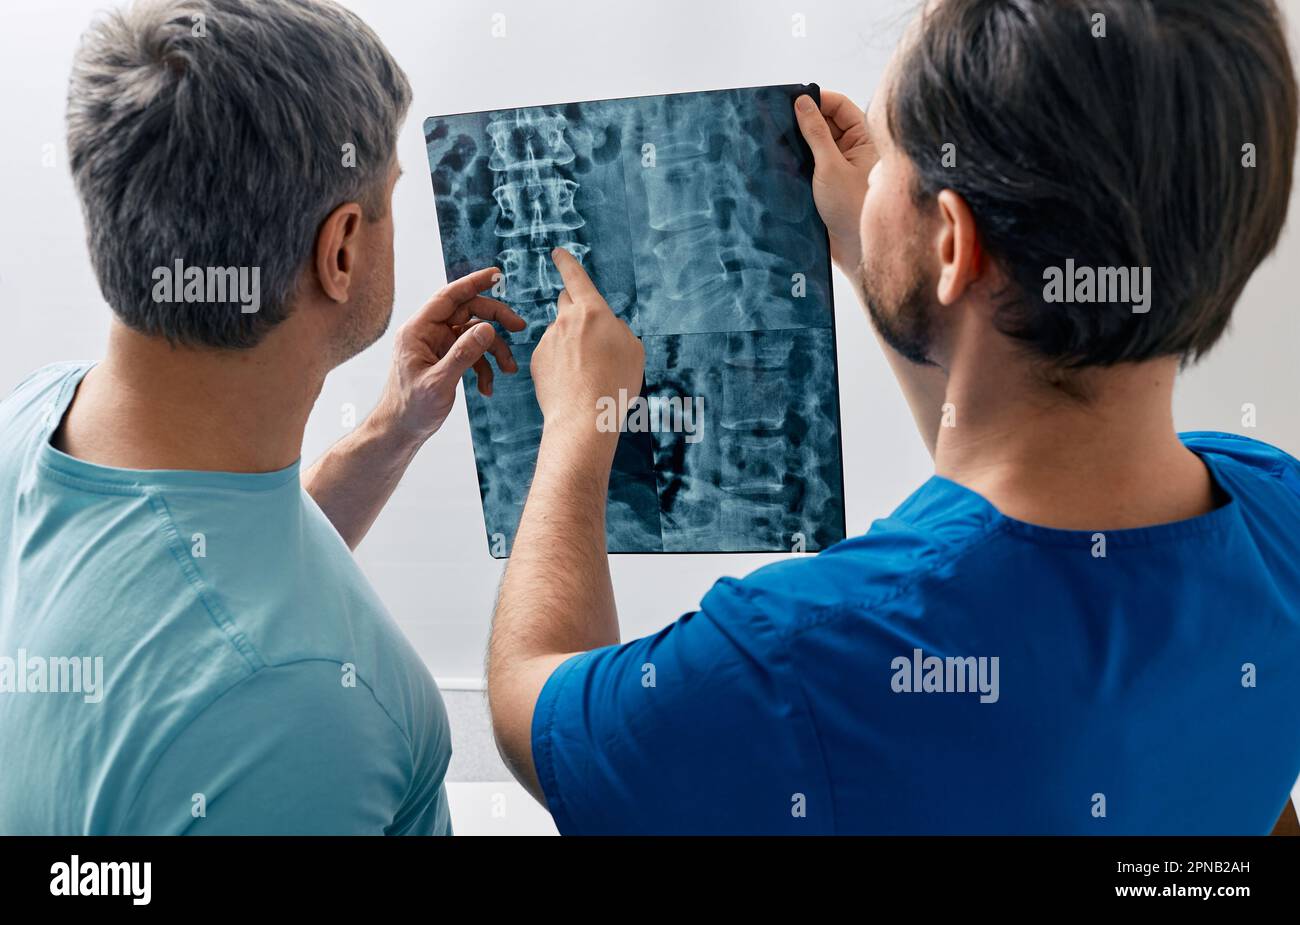 Manual therapist viewing X-ray of backbone with his male patient with spinal problem during medical consultation at hospital Stock Photo